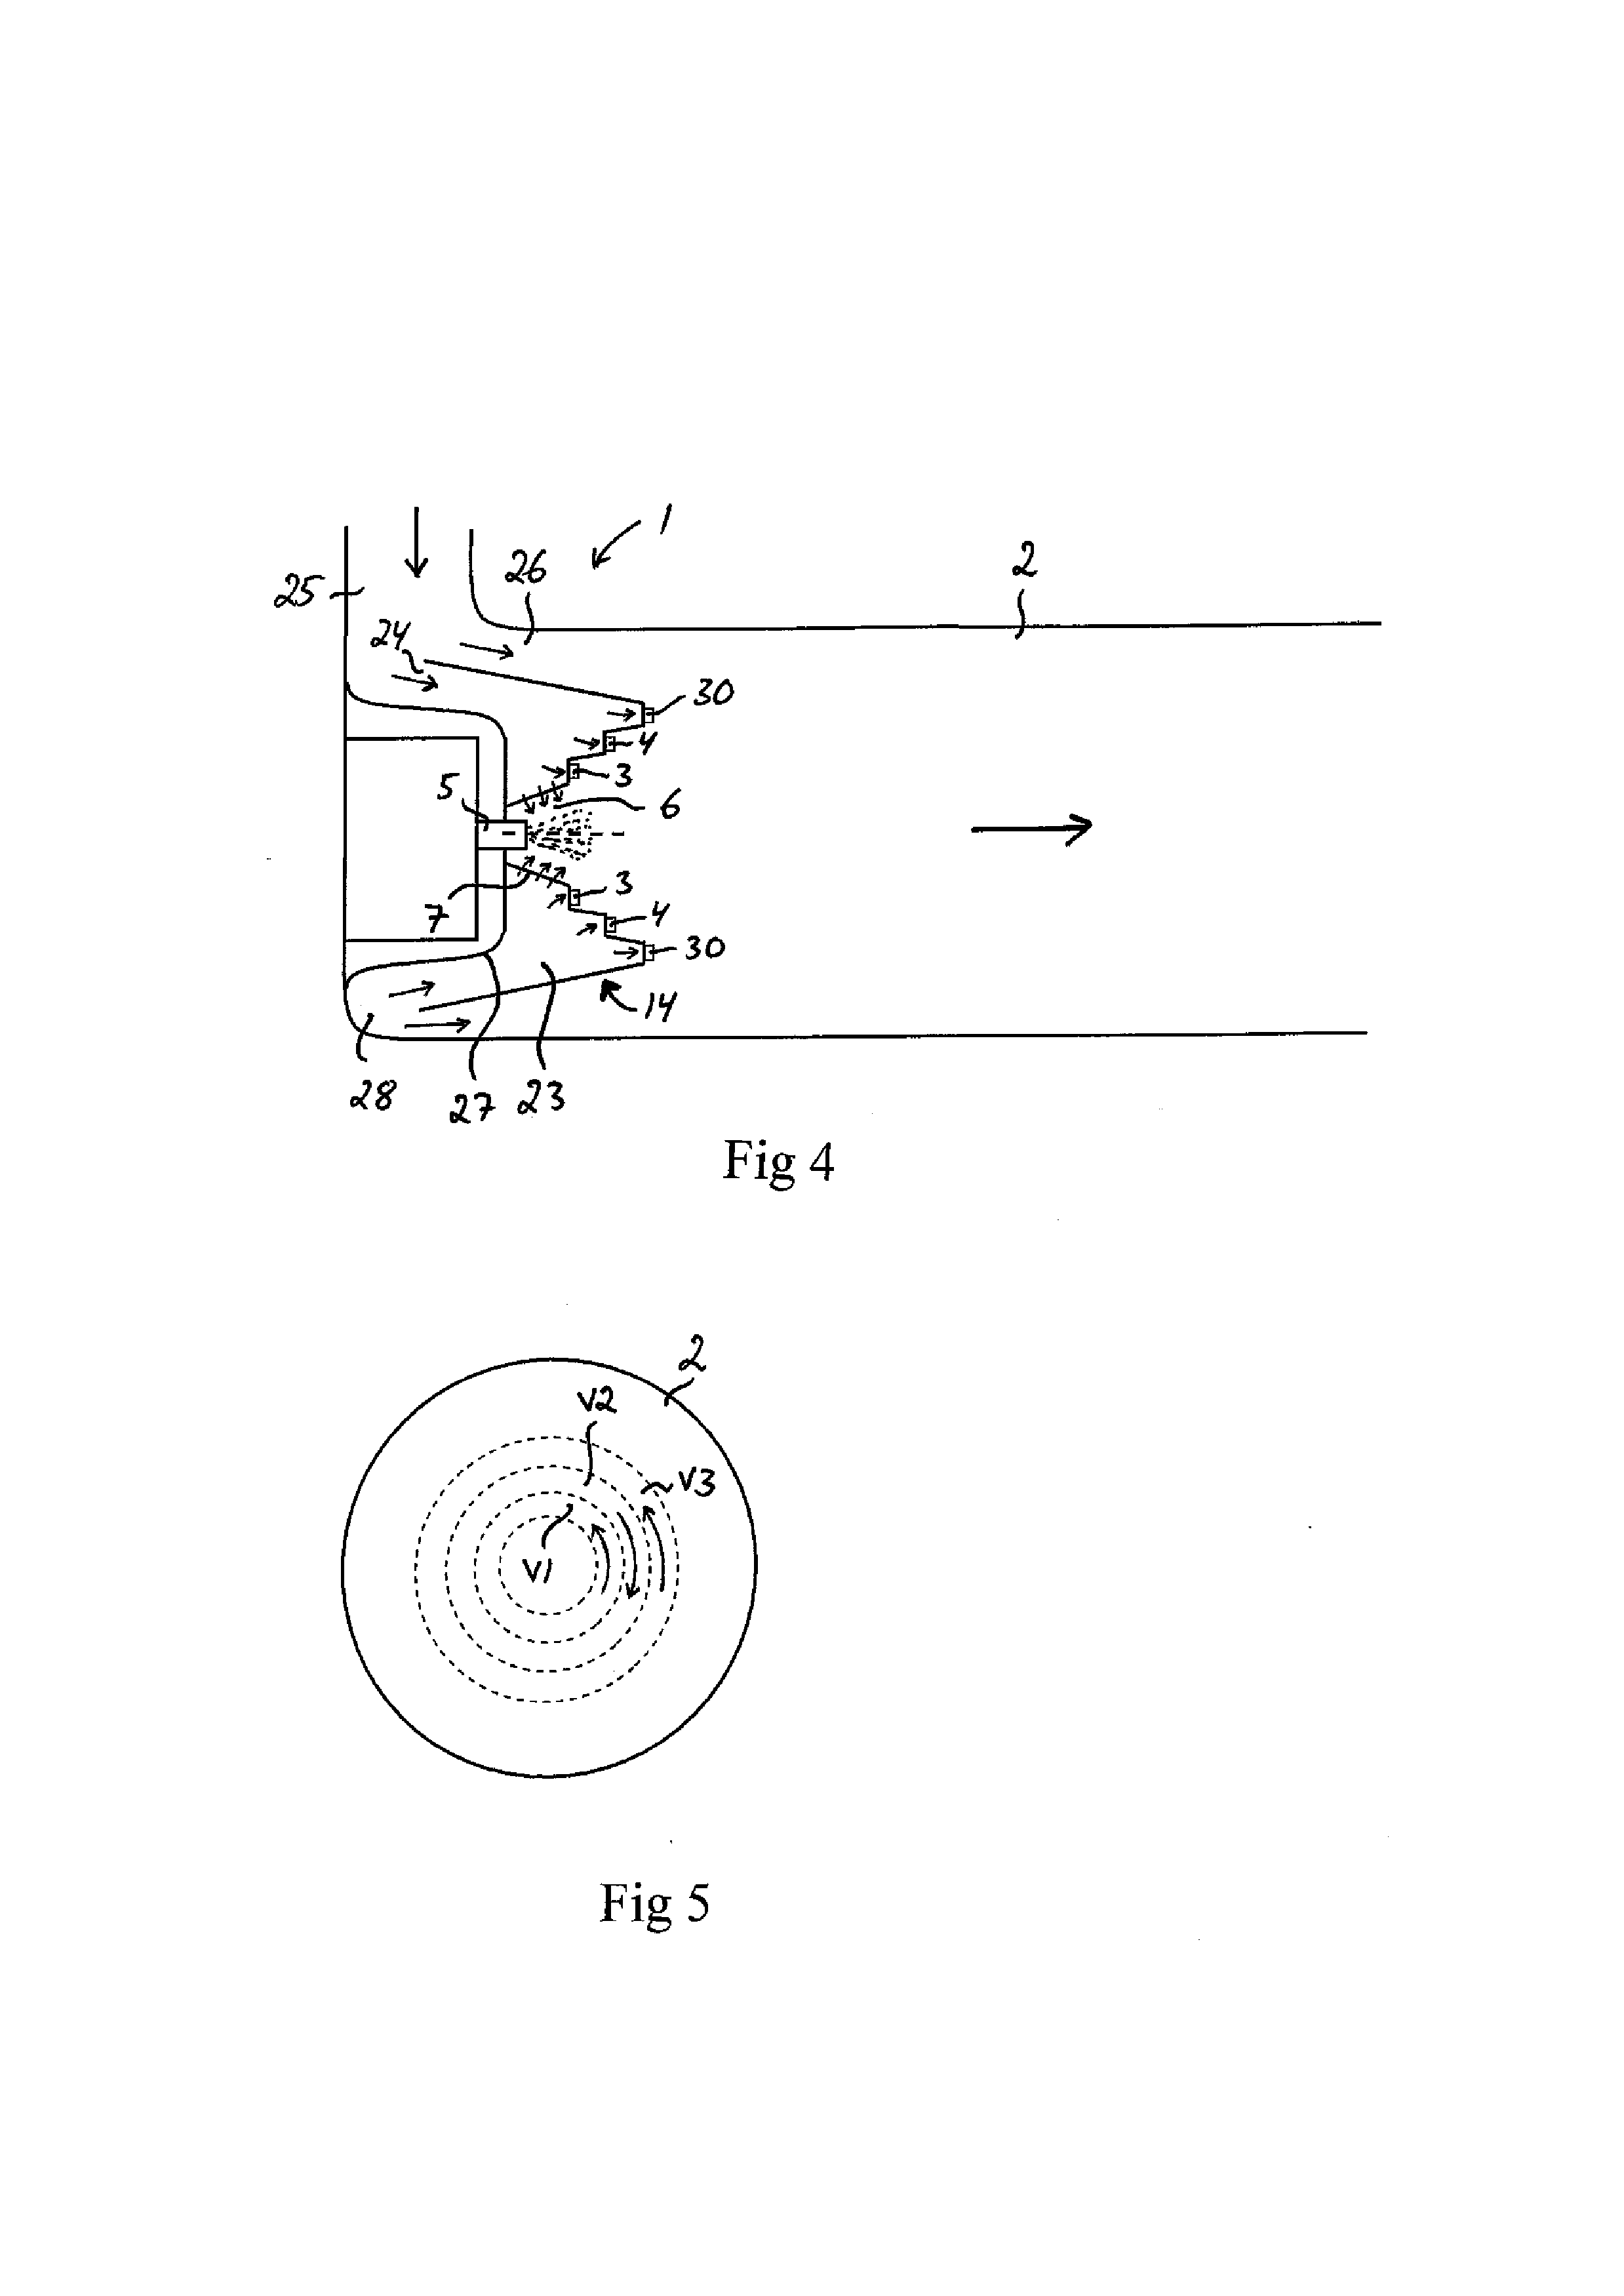 Arrangement for introducing a liquid medium into exhaust gases from a combustion engine